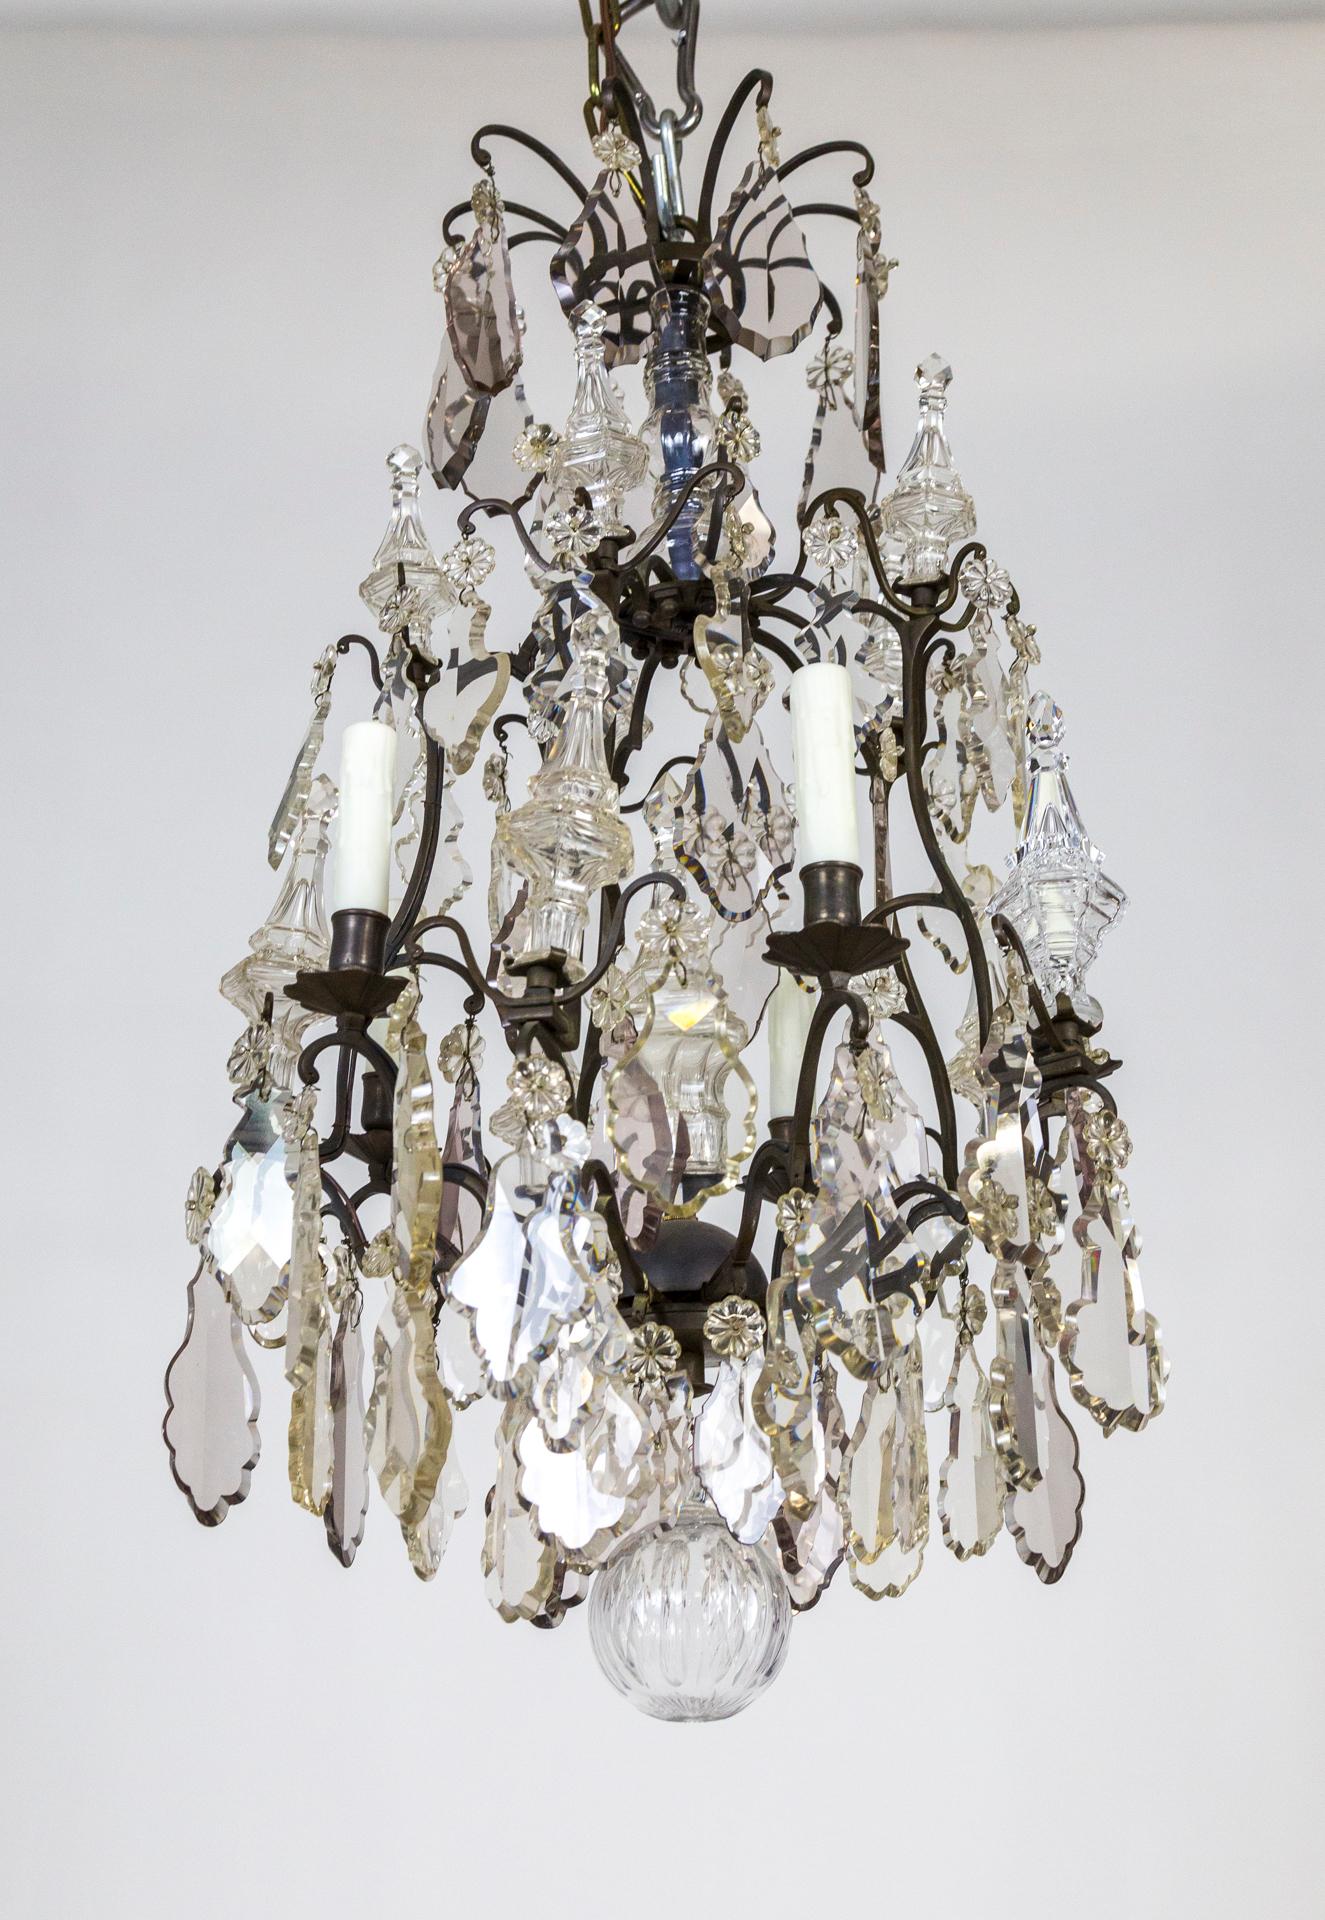 A Belle Epoque period blackened bronze, birdcage chandelier with maximum, heavy crystals in clear and subtle, smoky amethyst; including large pendeloques and spires. A large, cut glass final ball. 5 lights. Newly rewired. 34.5